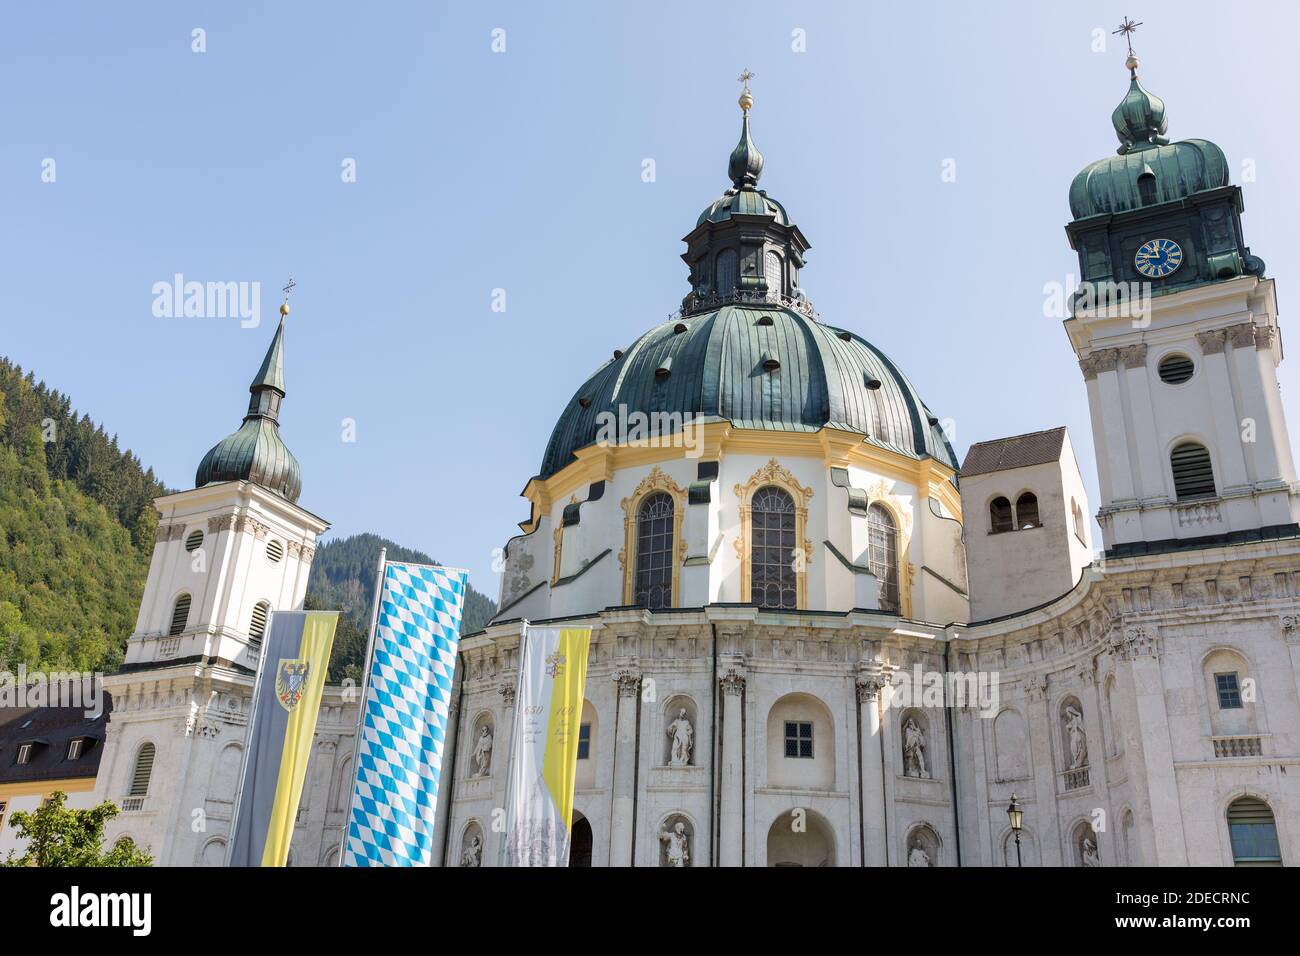 Ettal, Germany - Sept 19, 2020: View on the main church of Ettal abbey. A popular tourist destination in upper bavaria. Stock Photo